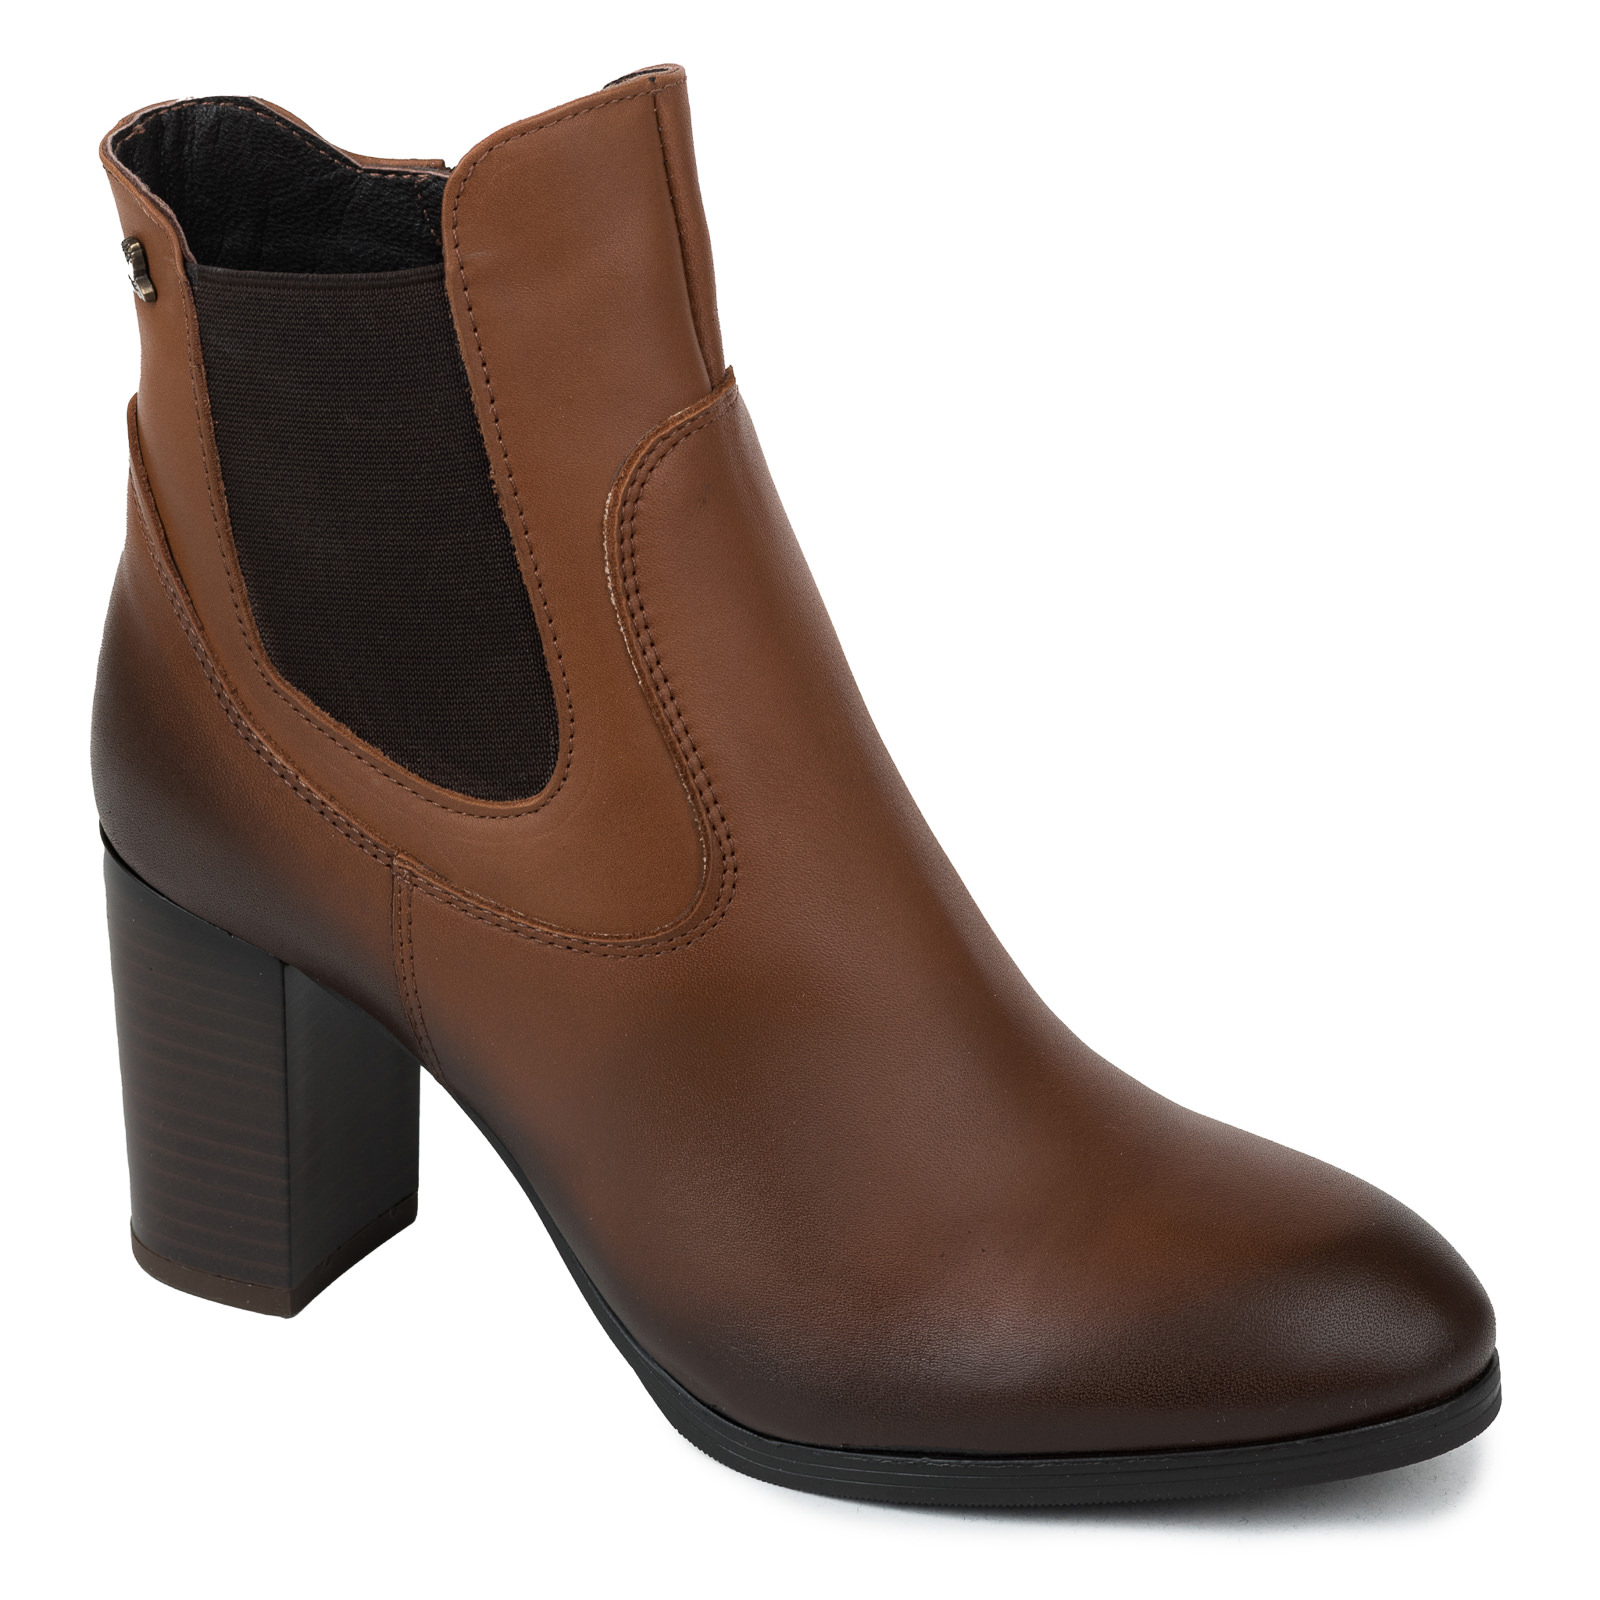 Leather ankle boots B480 - BROWN